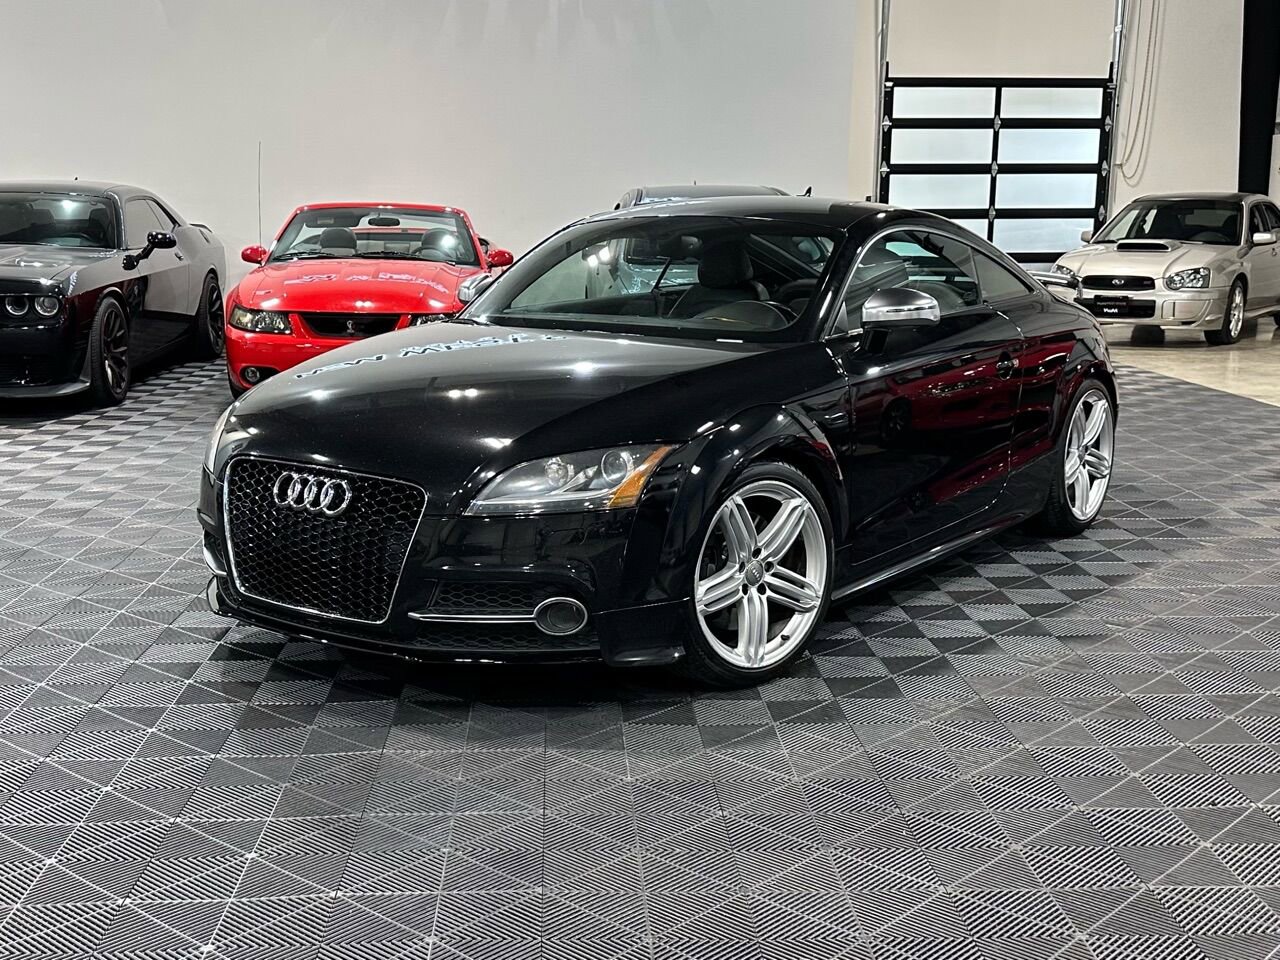 2012 Audi TTS for Sale in Tacoma, WA (Test Drive at Home) - Kelley Blue Book